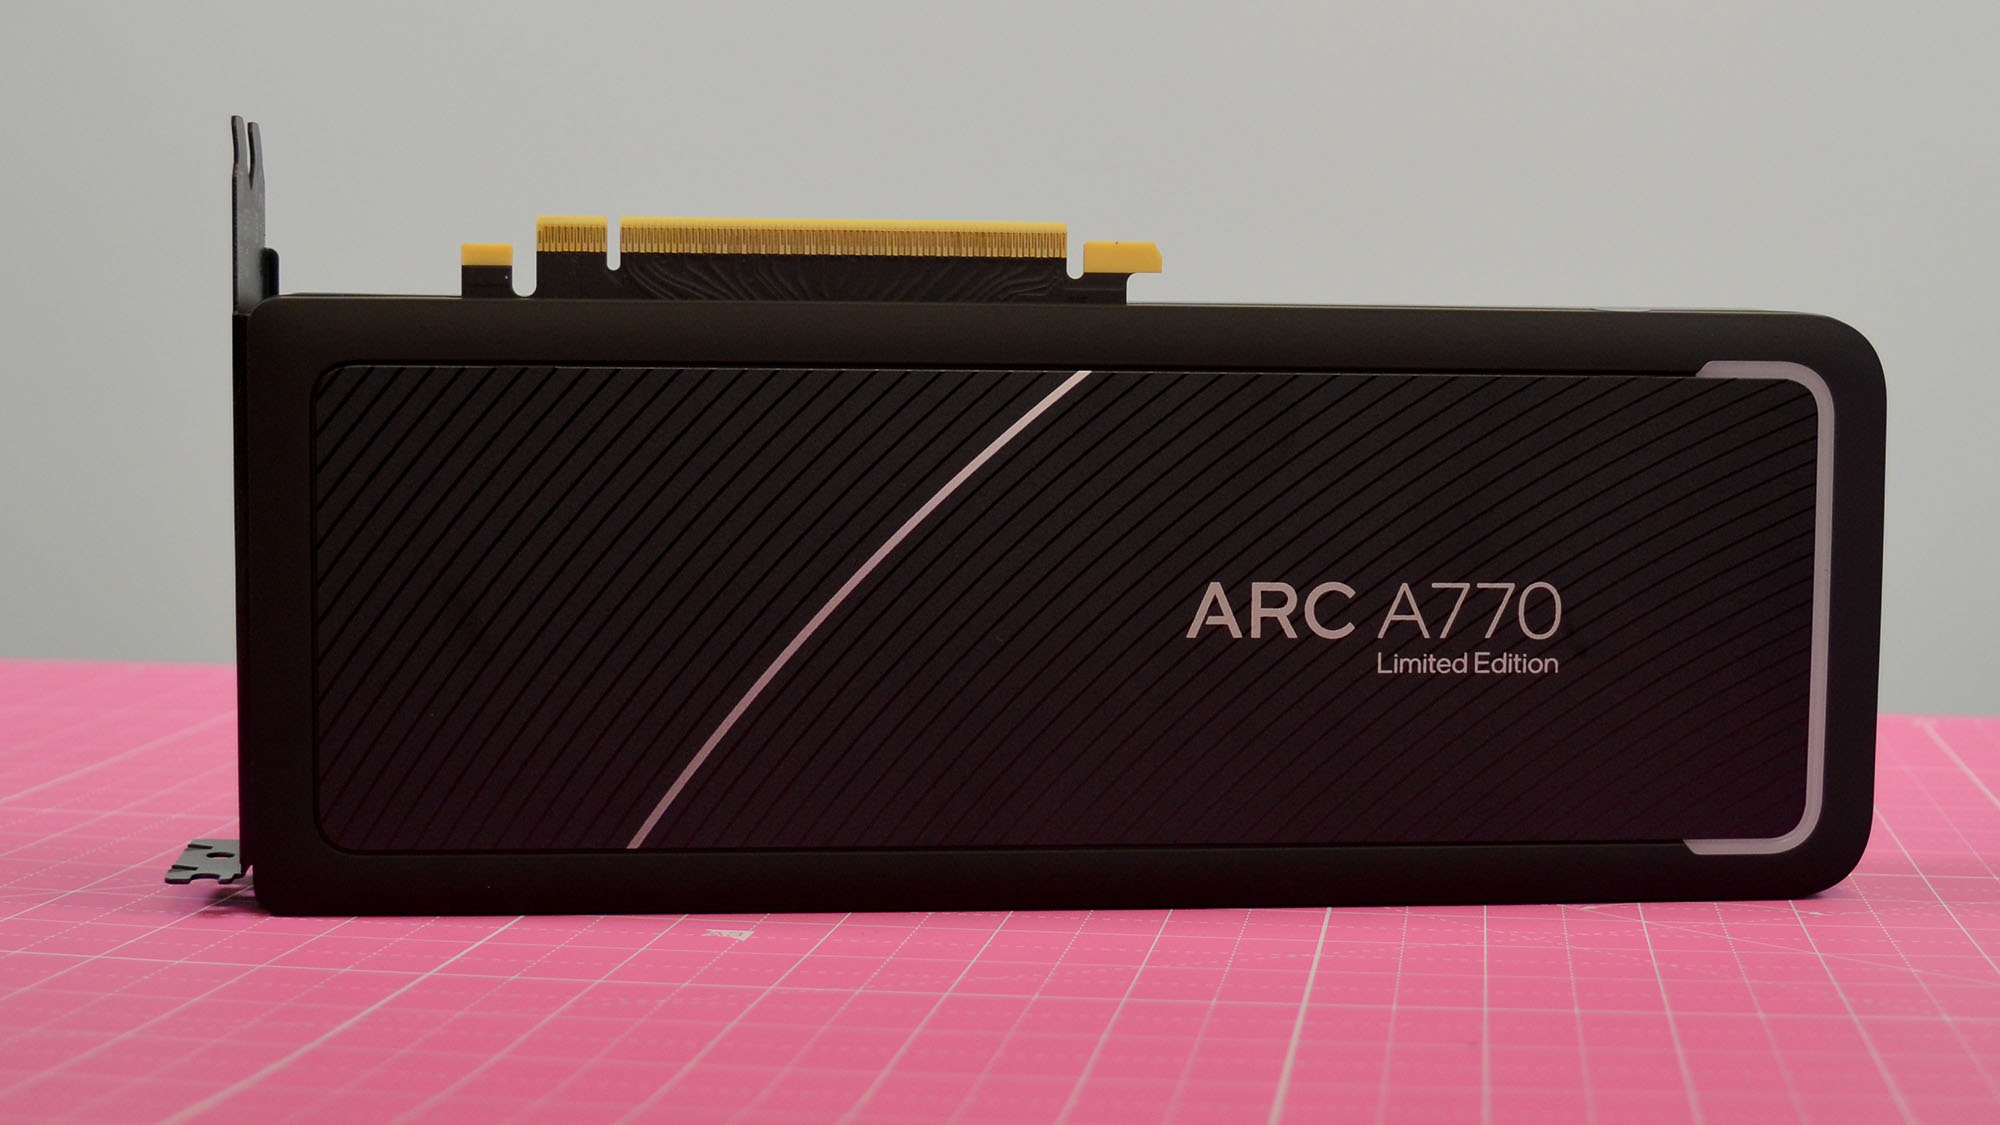 An Intel Arc A770 LE graphics card on a table with a pink desk mat